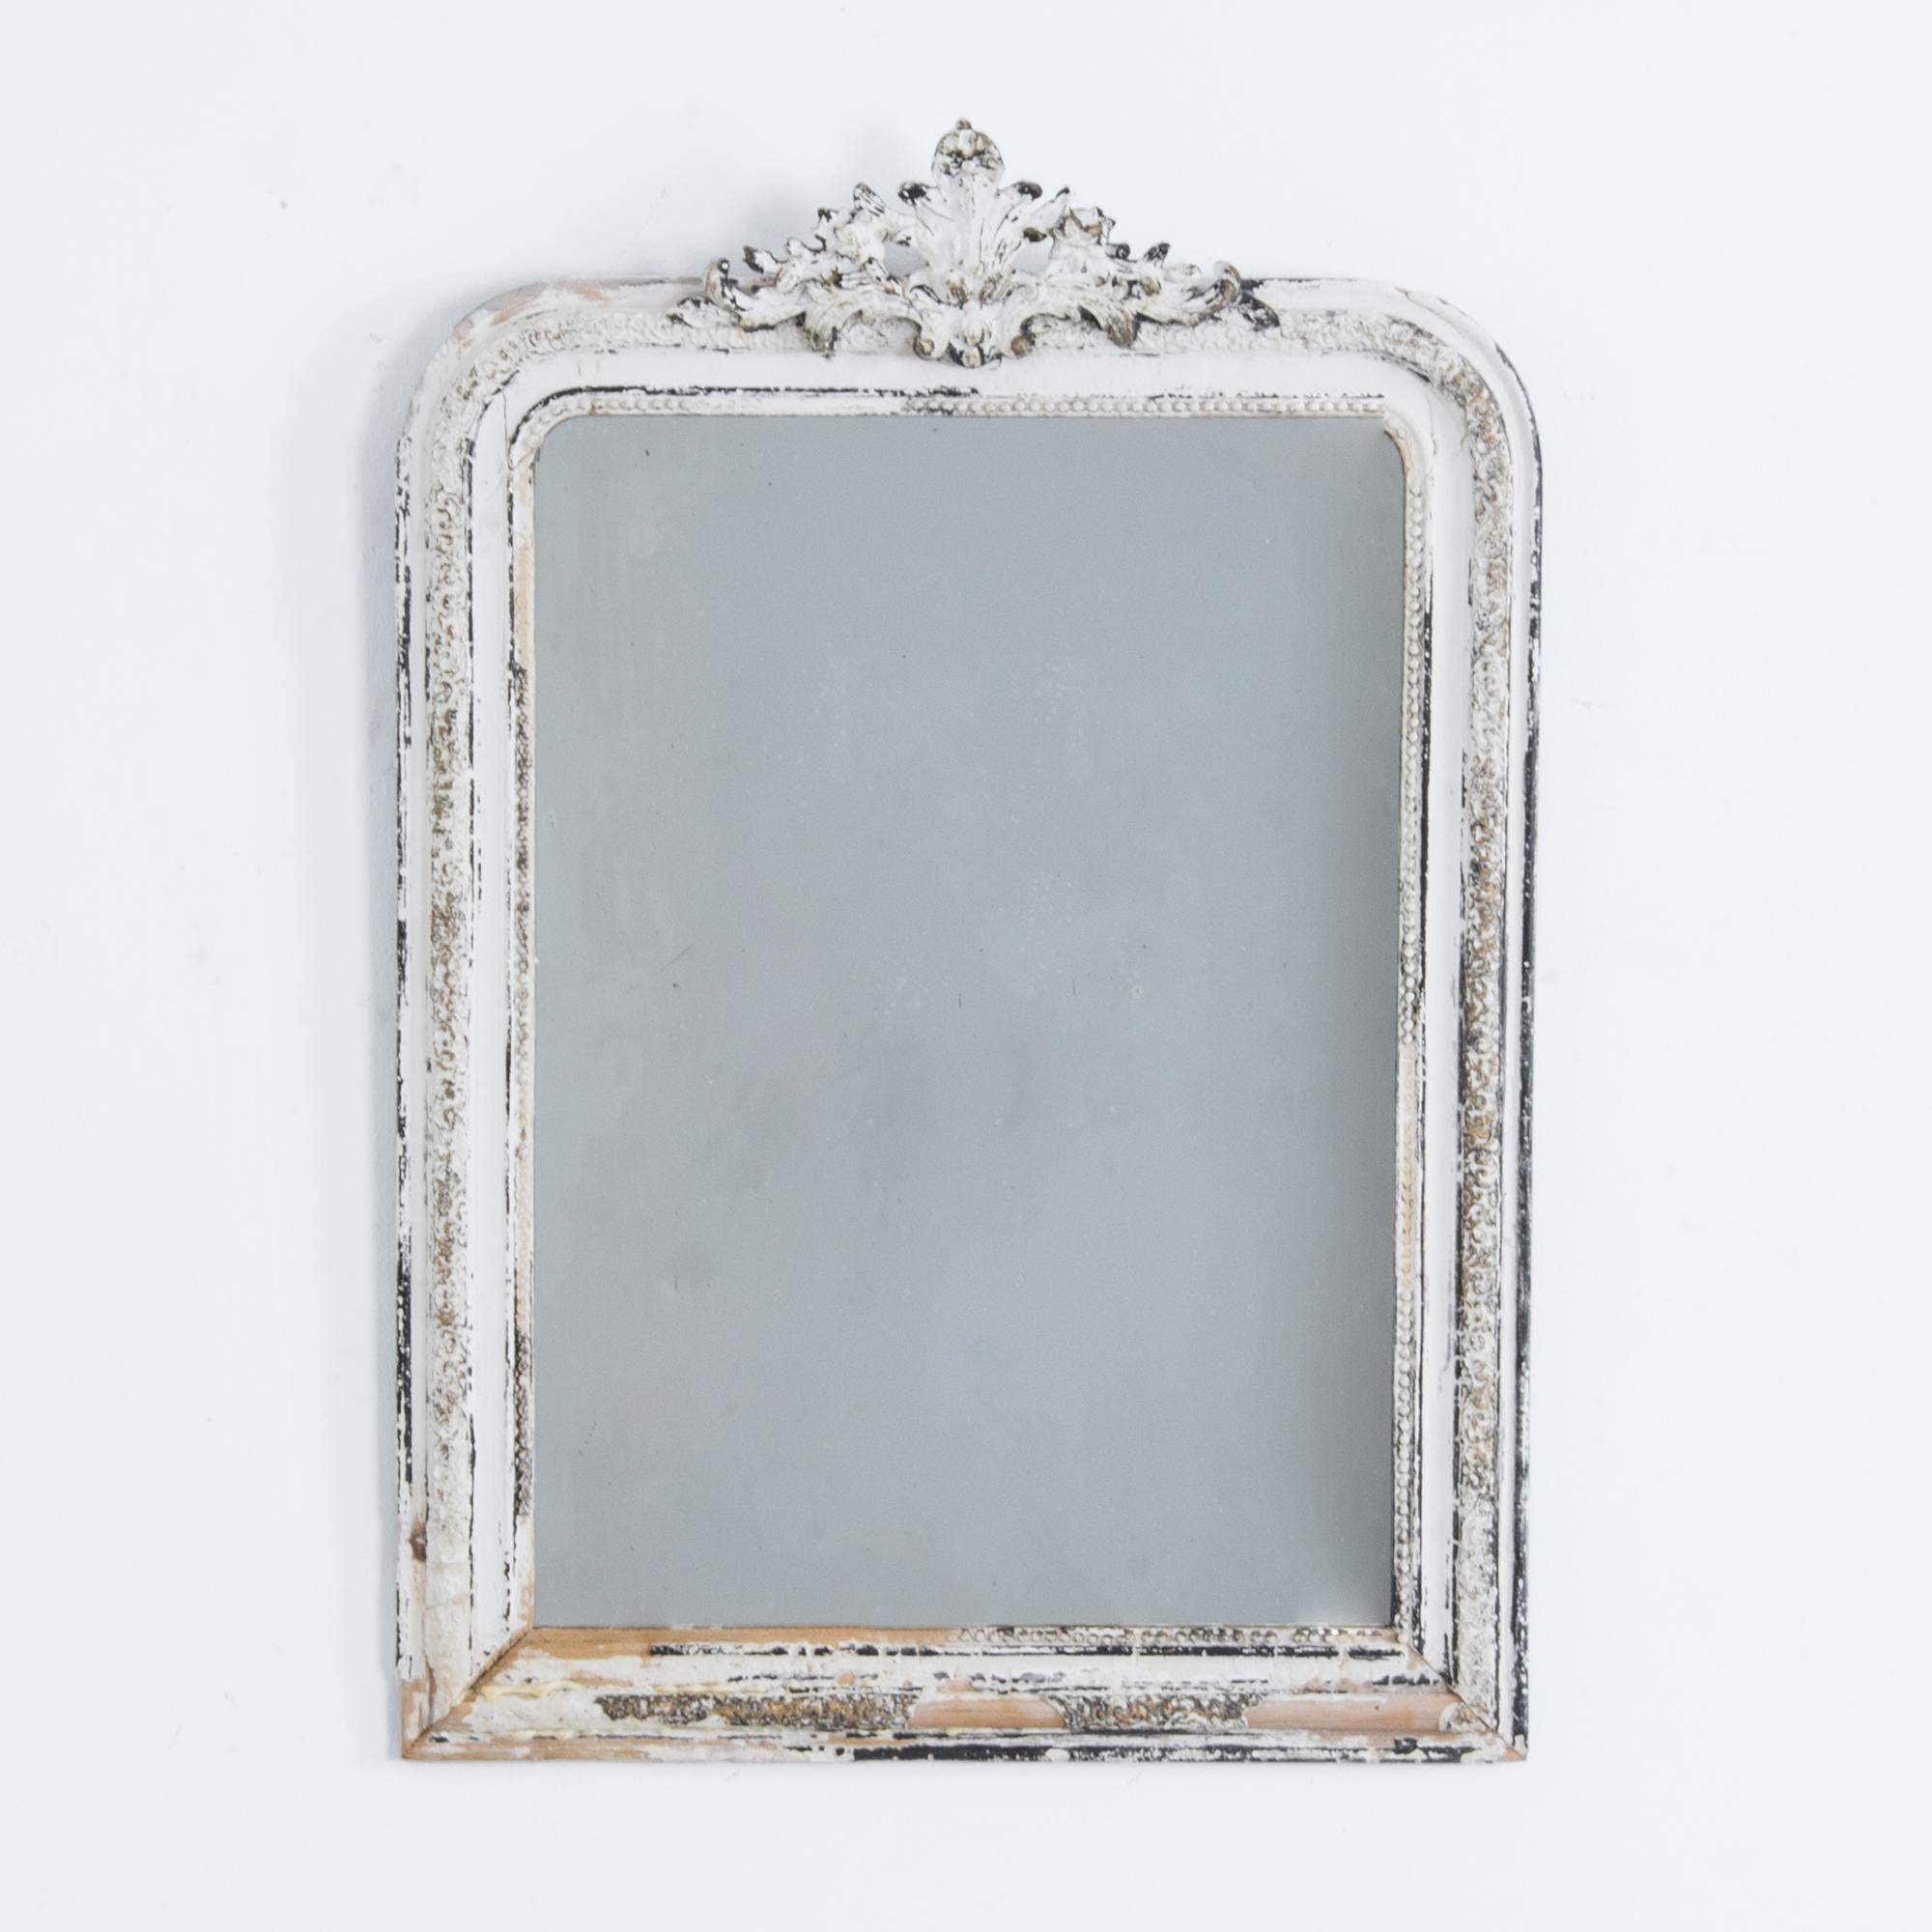 Contrasting the usual opulence of the Second Empire style, this pared down white frame charms in spaces simple or ornate. From France, circa 1880. Finely crafted with traditional techniques from European oak, plastered and painted. This example